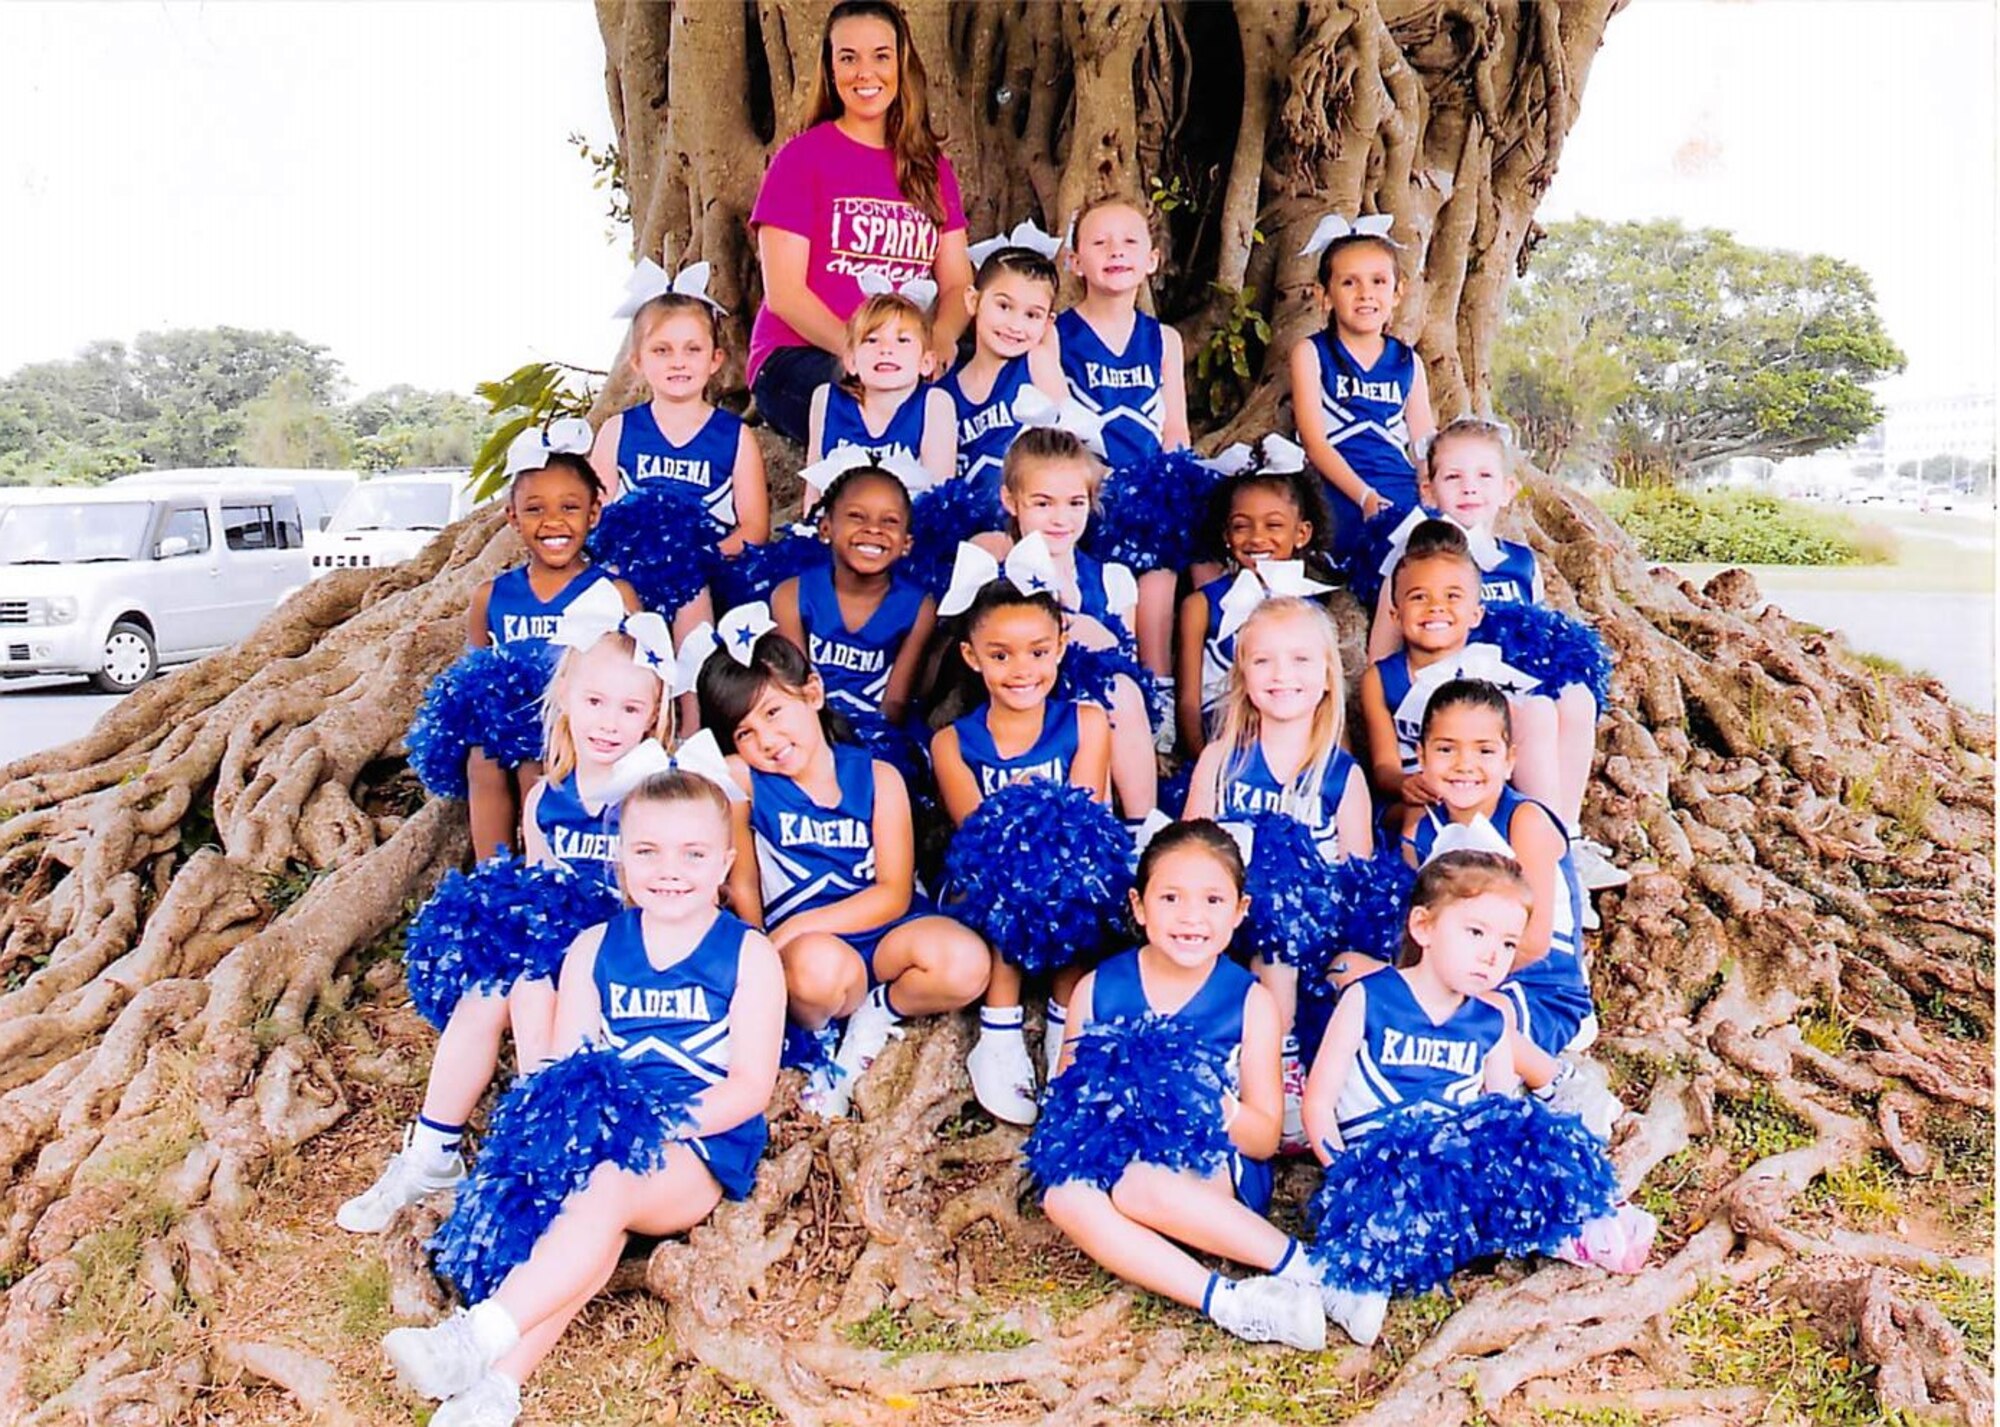 Staff Sgt. Angela Wilkerson, 22nd Air Refueling Wing command chief executive assistant, poses with the cheerleaders she coached, May 2015, at Kadena Air Base, Japan. Wilkerson has made cheerleading a large part of her life since she was 4 years old and is starting McConnell’s first cheer program in March. (Courtesy photo)